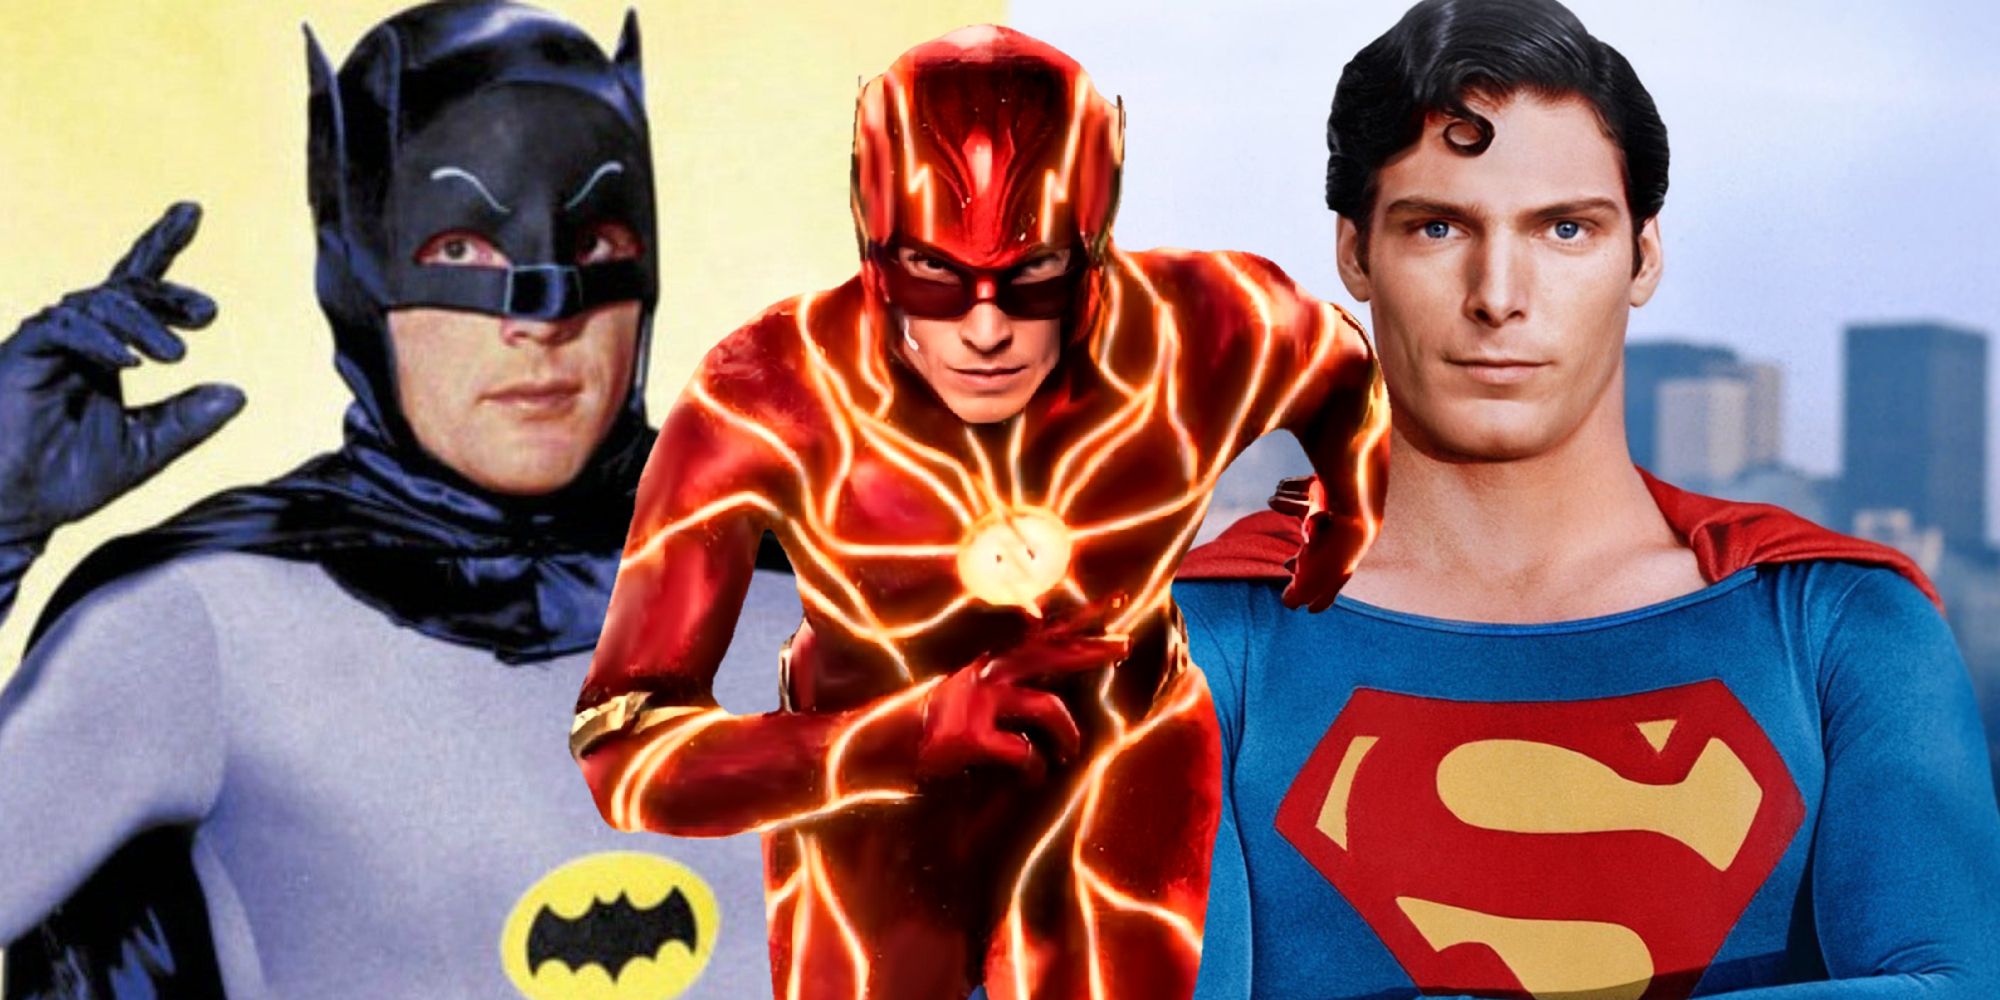 Adam West's Batman and Christopher Reeve's Superman in The Flash